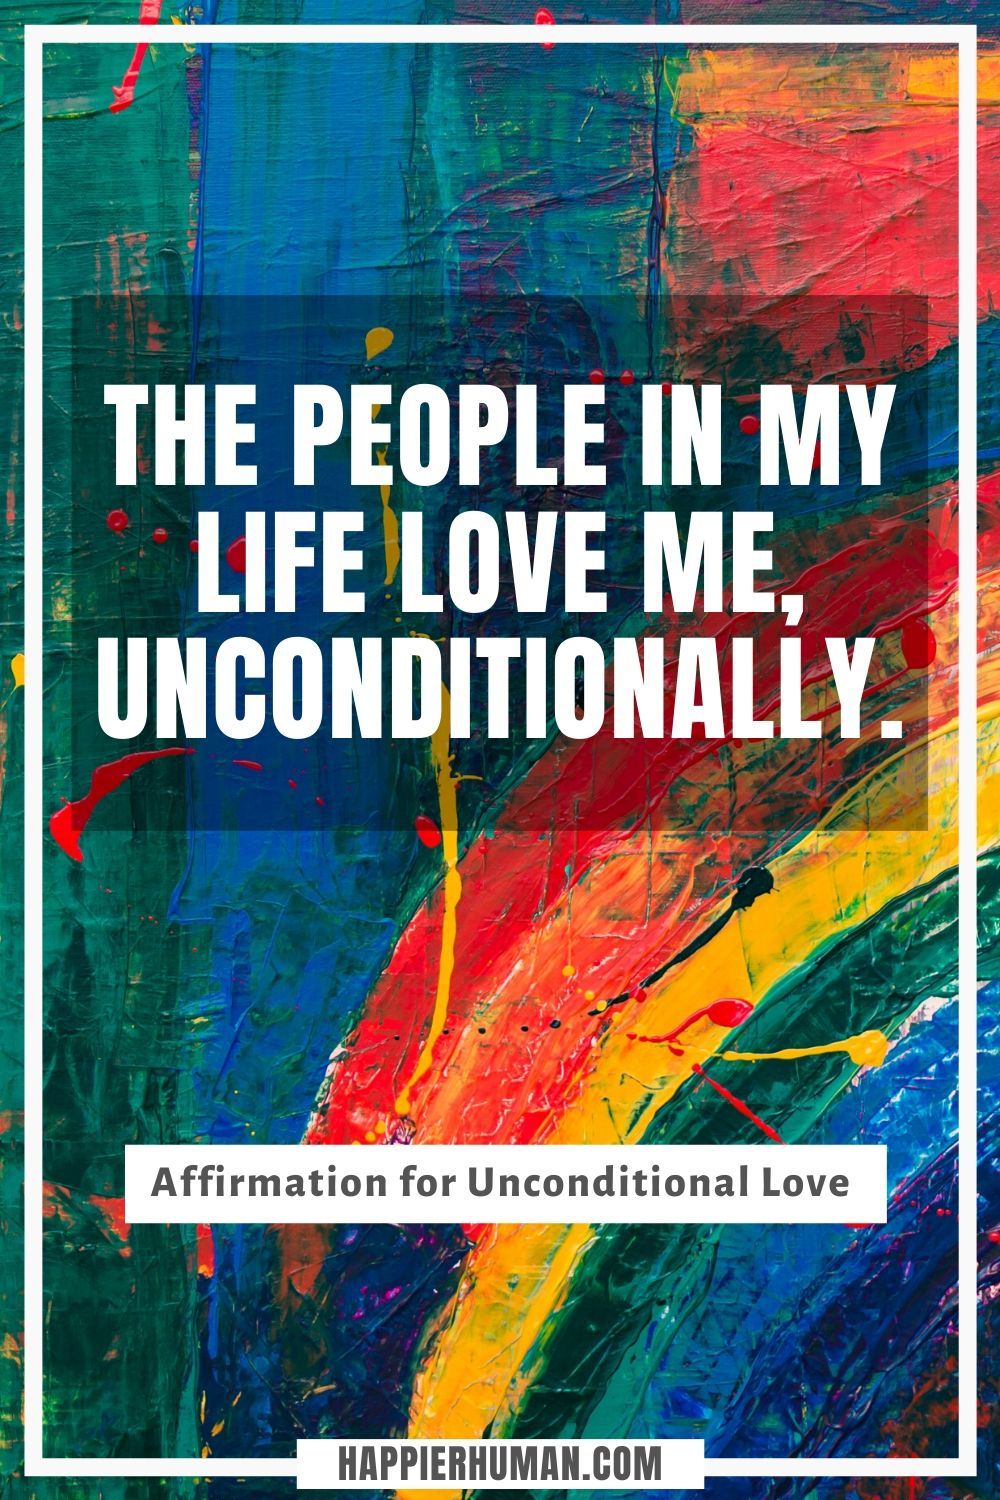 Affirmations for Unconditional Love - “The people in my life love me, unconditionally.” | affirmation of love quotes | daily affirmations for girlfriend | marriage affirmations for a specific person #nevergiveup #lovingsomeone #affirmationsonlove